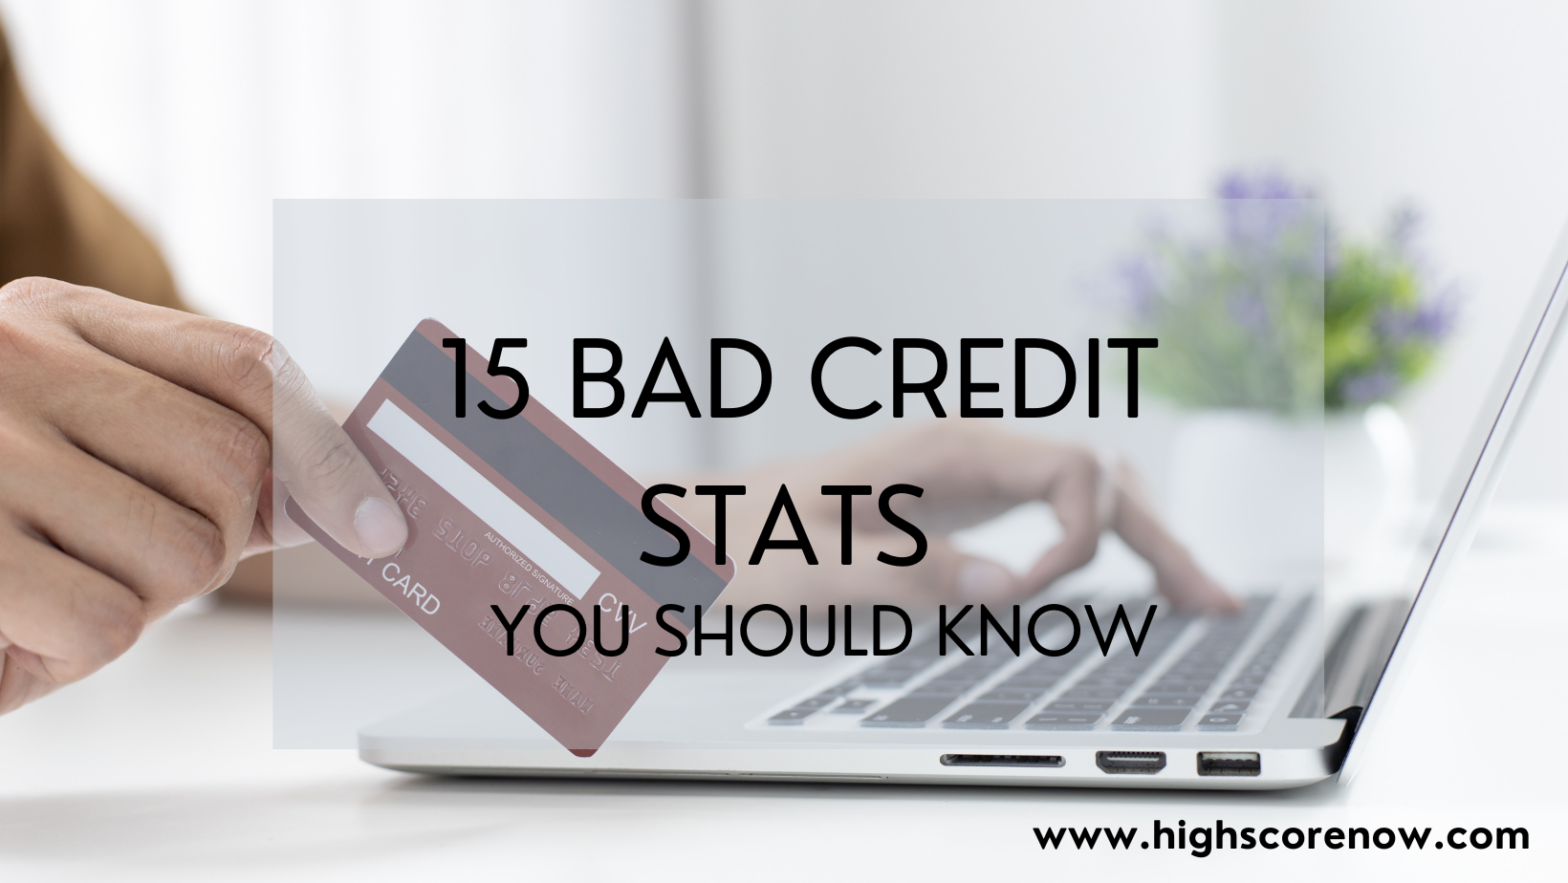 15 Interesting Bad Credit Stats You Need to Know